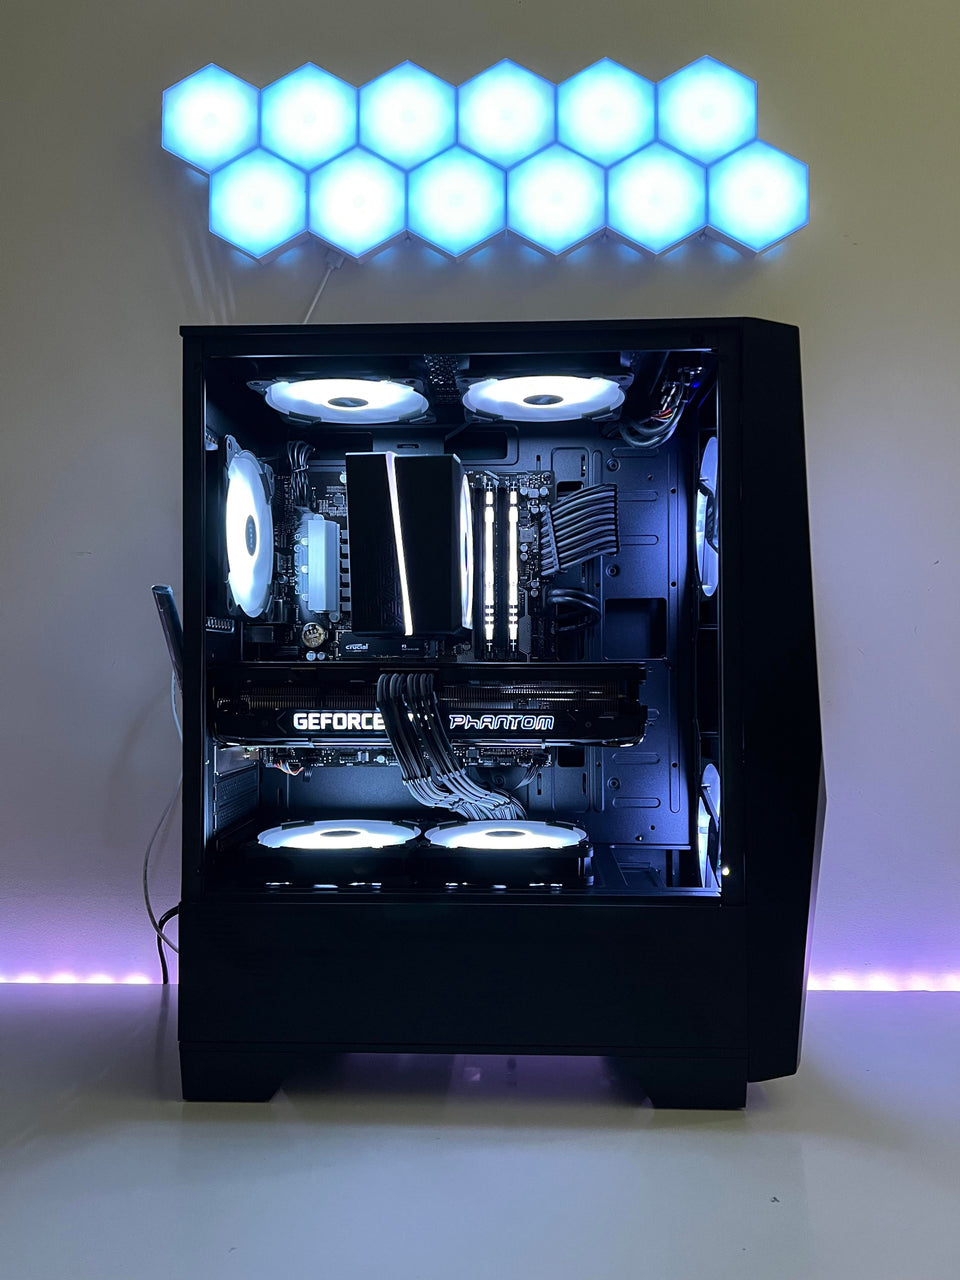 🔥🔥🔥 FORGE PC SPECIAL: RTX 4080 SUPER 16GB - Intel i7-14700F Work & Gaming PC